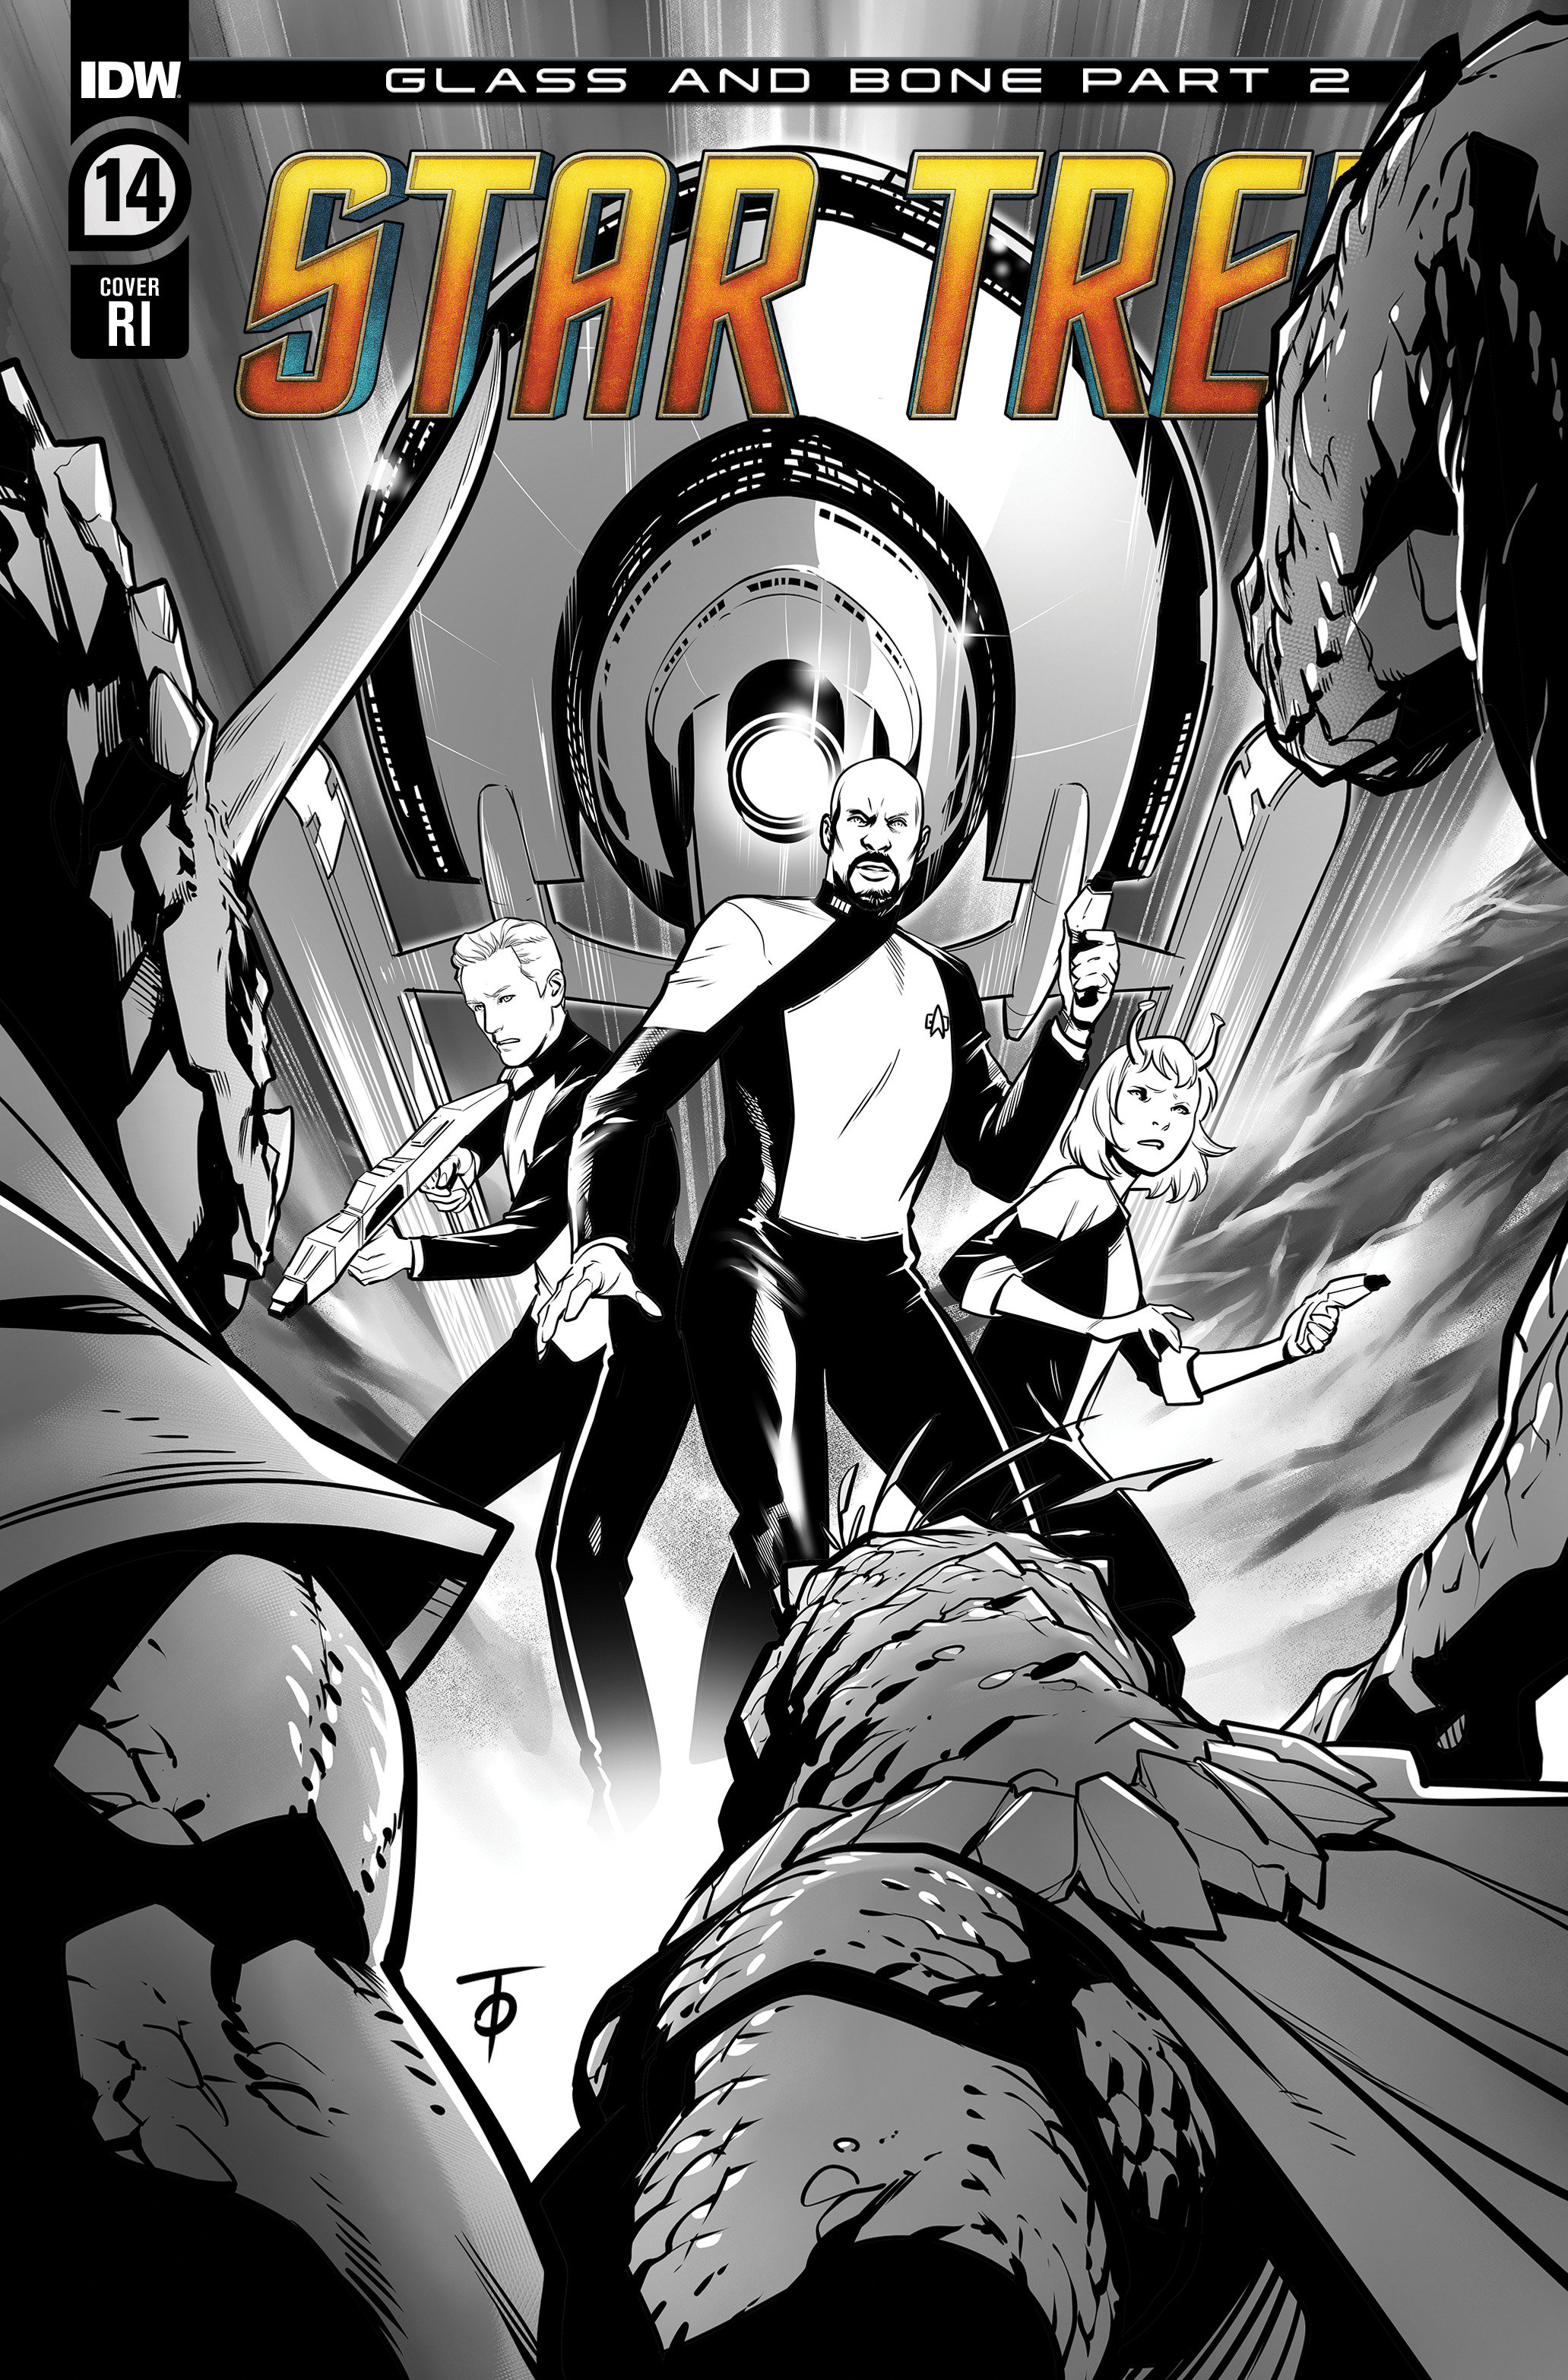 Star Trek #14 Cover To B&W 1 for 10 Incentive